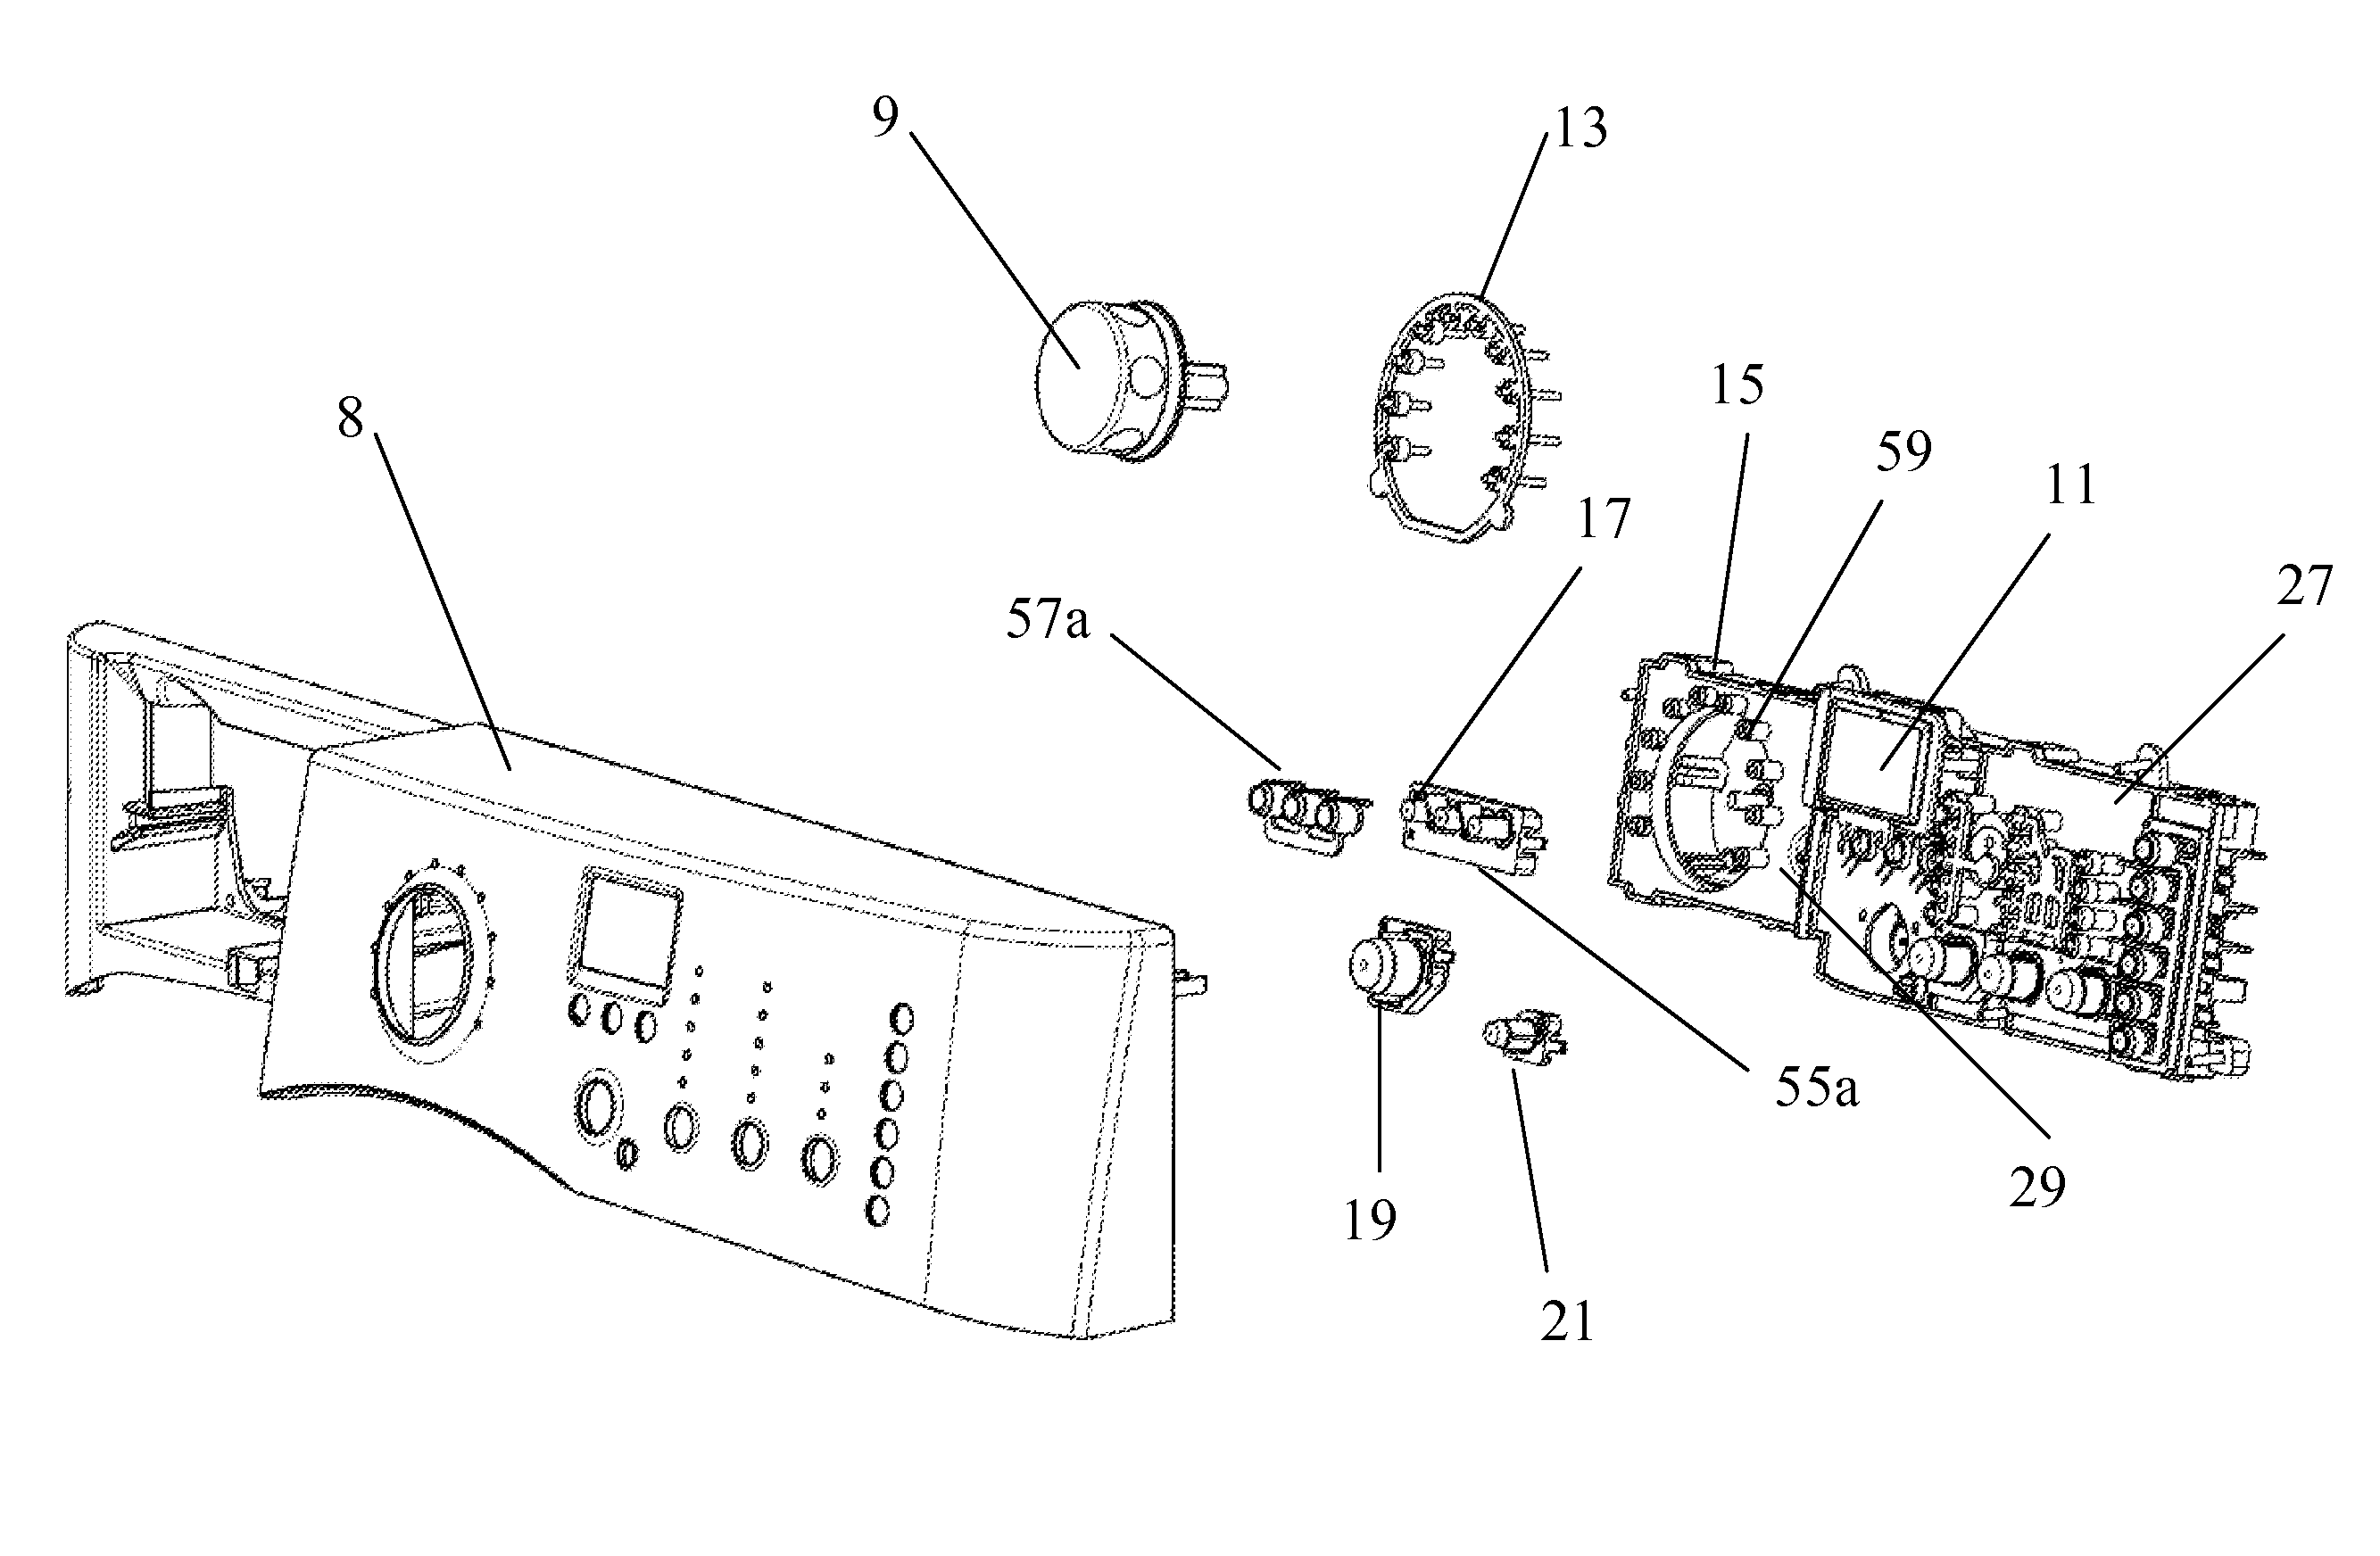 Unitized appliance control panel assembly and components of the assembly